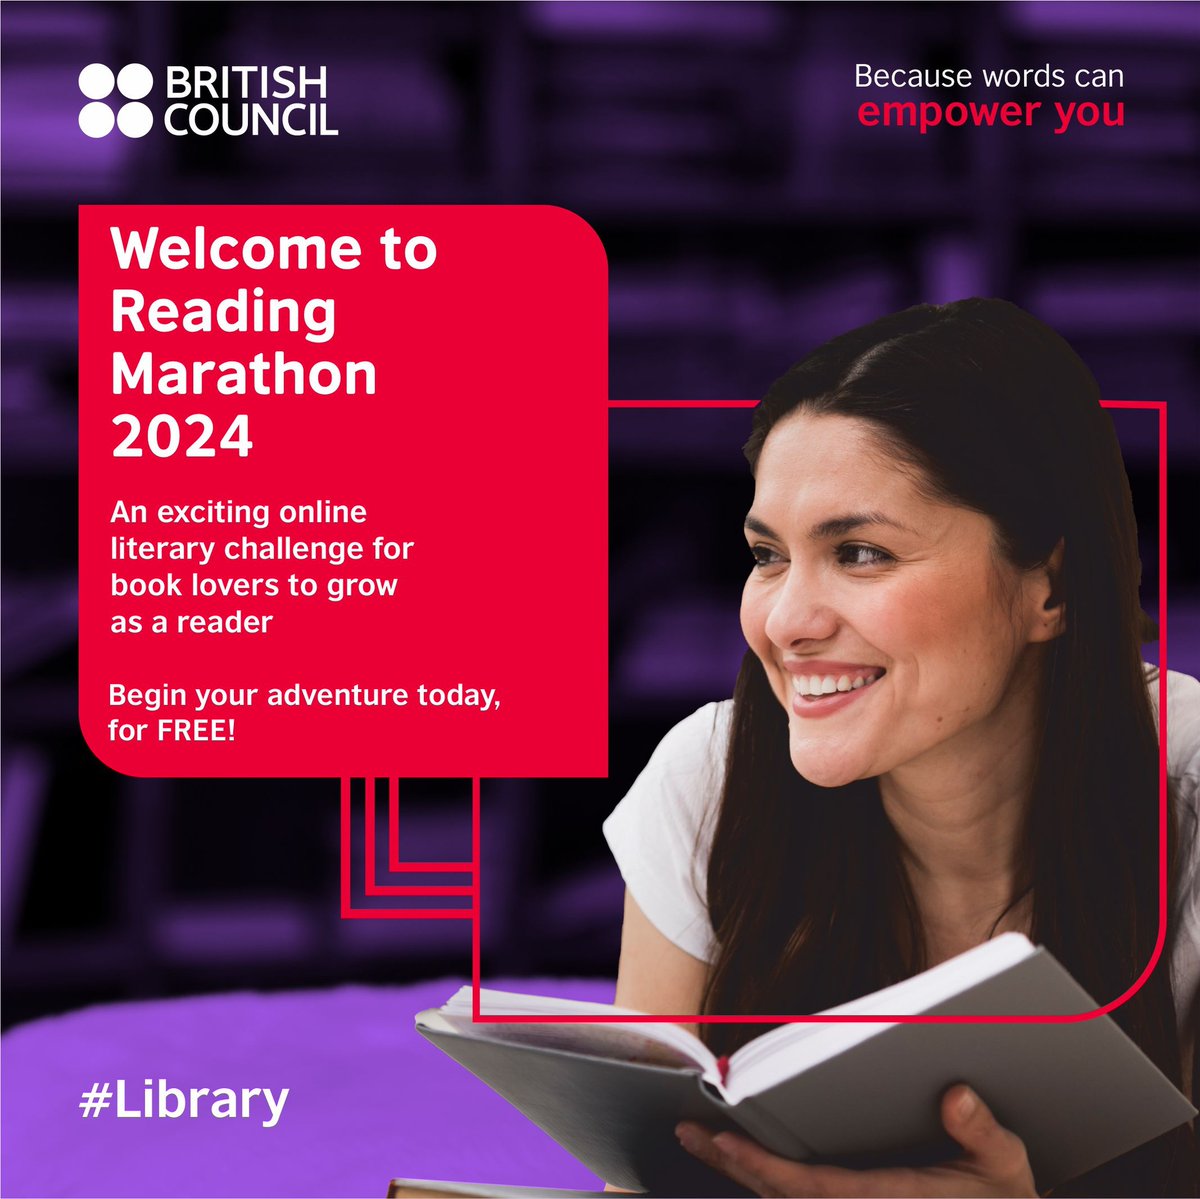 Ready. Set. Read. 📚 Calling all literary minds this summer to the @inBritish Reading Marathon. Your mission, should you choose to accept it, is to complete reading 4 books within two months borrowed from British Council’s curated library collection. 🔗 britishcouncil.org/events/reading…